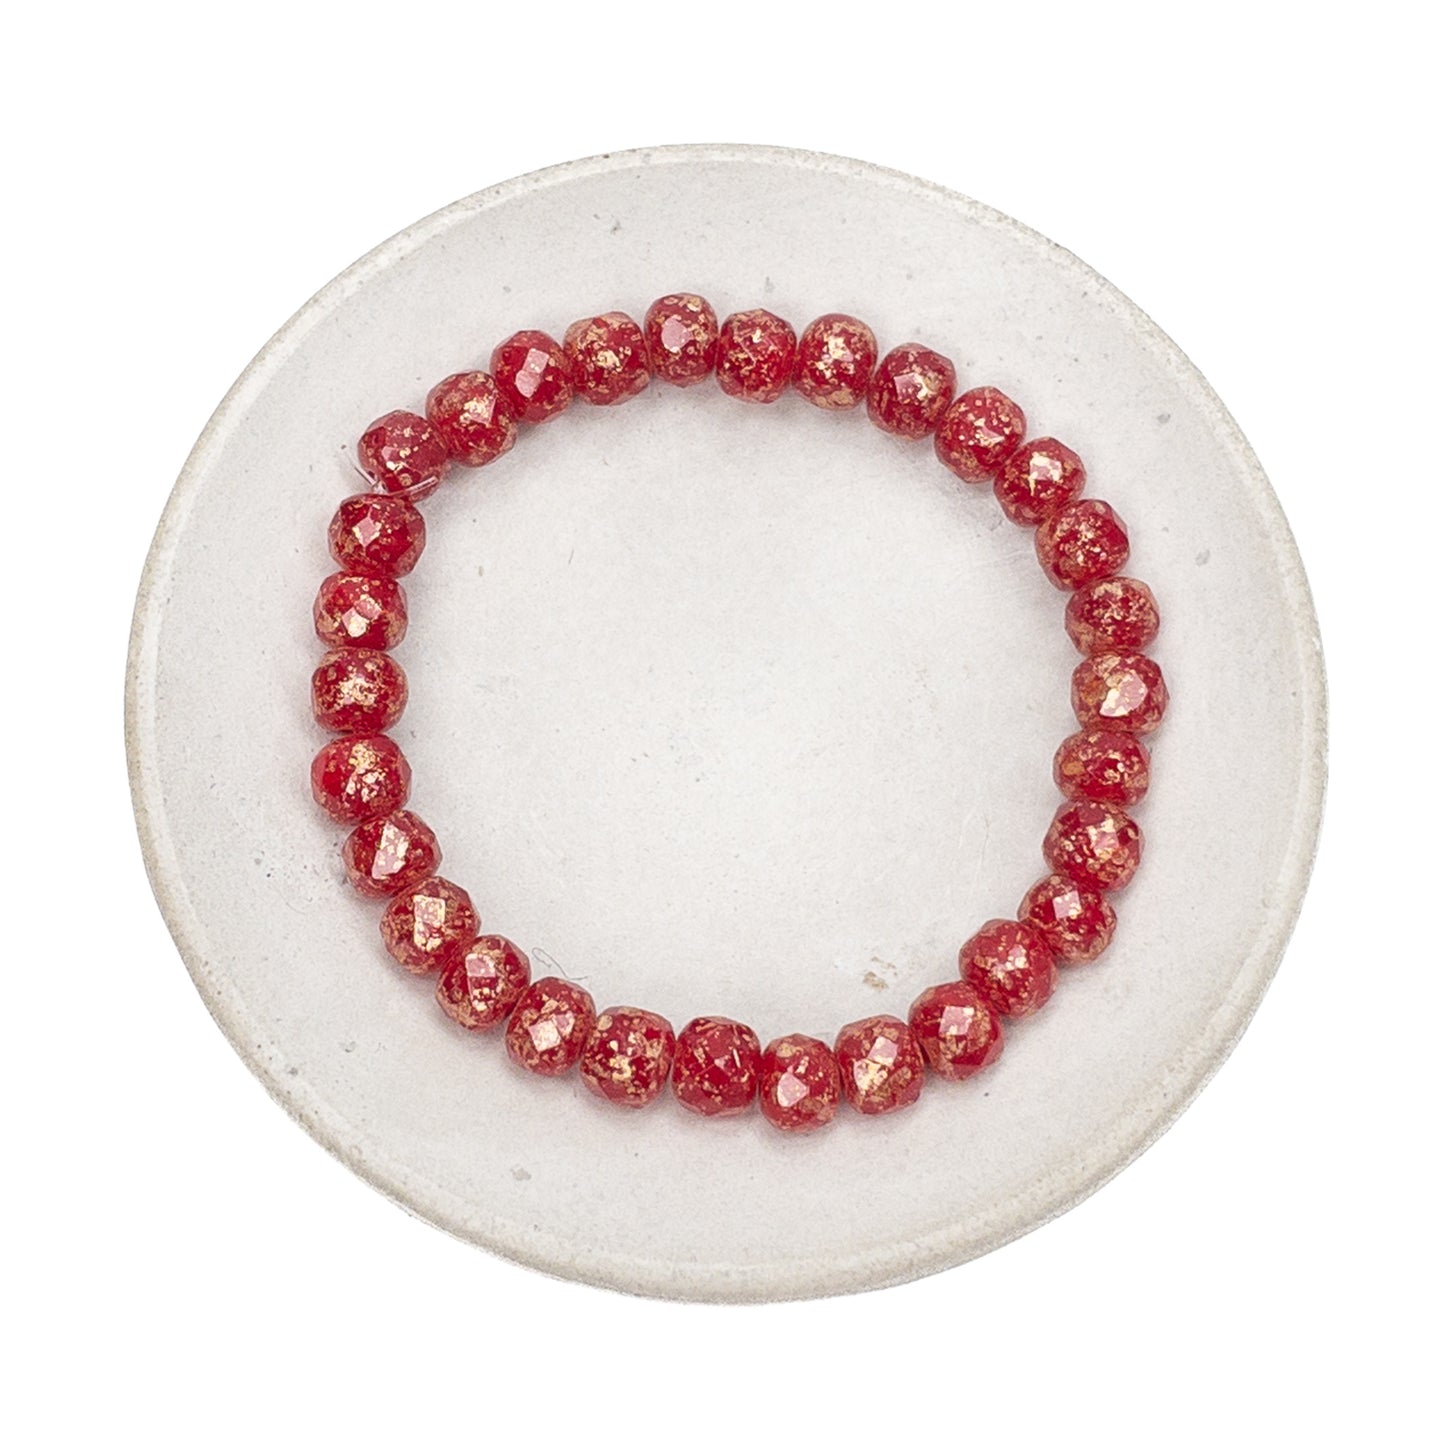 Gold Washed Red 5x3mm Faceted Rondelle Glass Bead - 30 pcs.